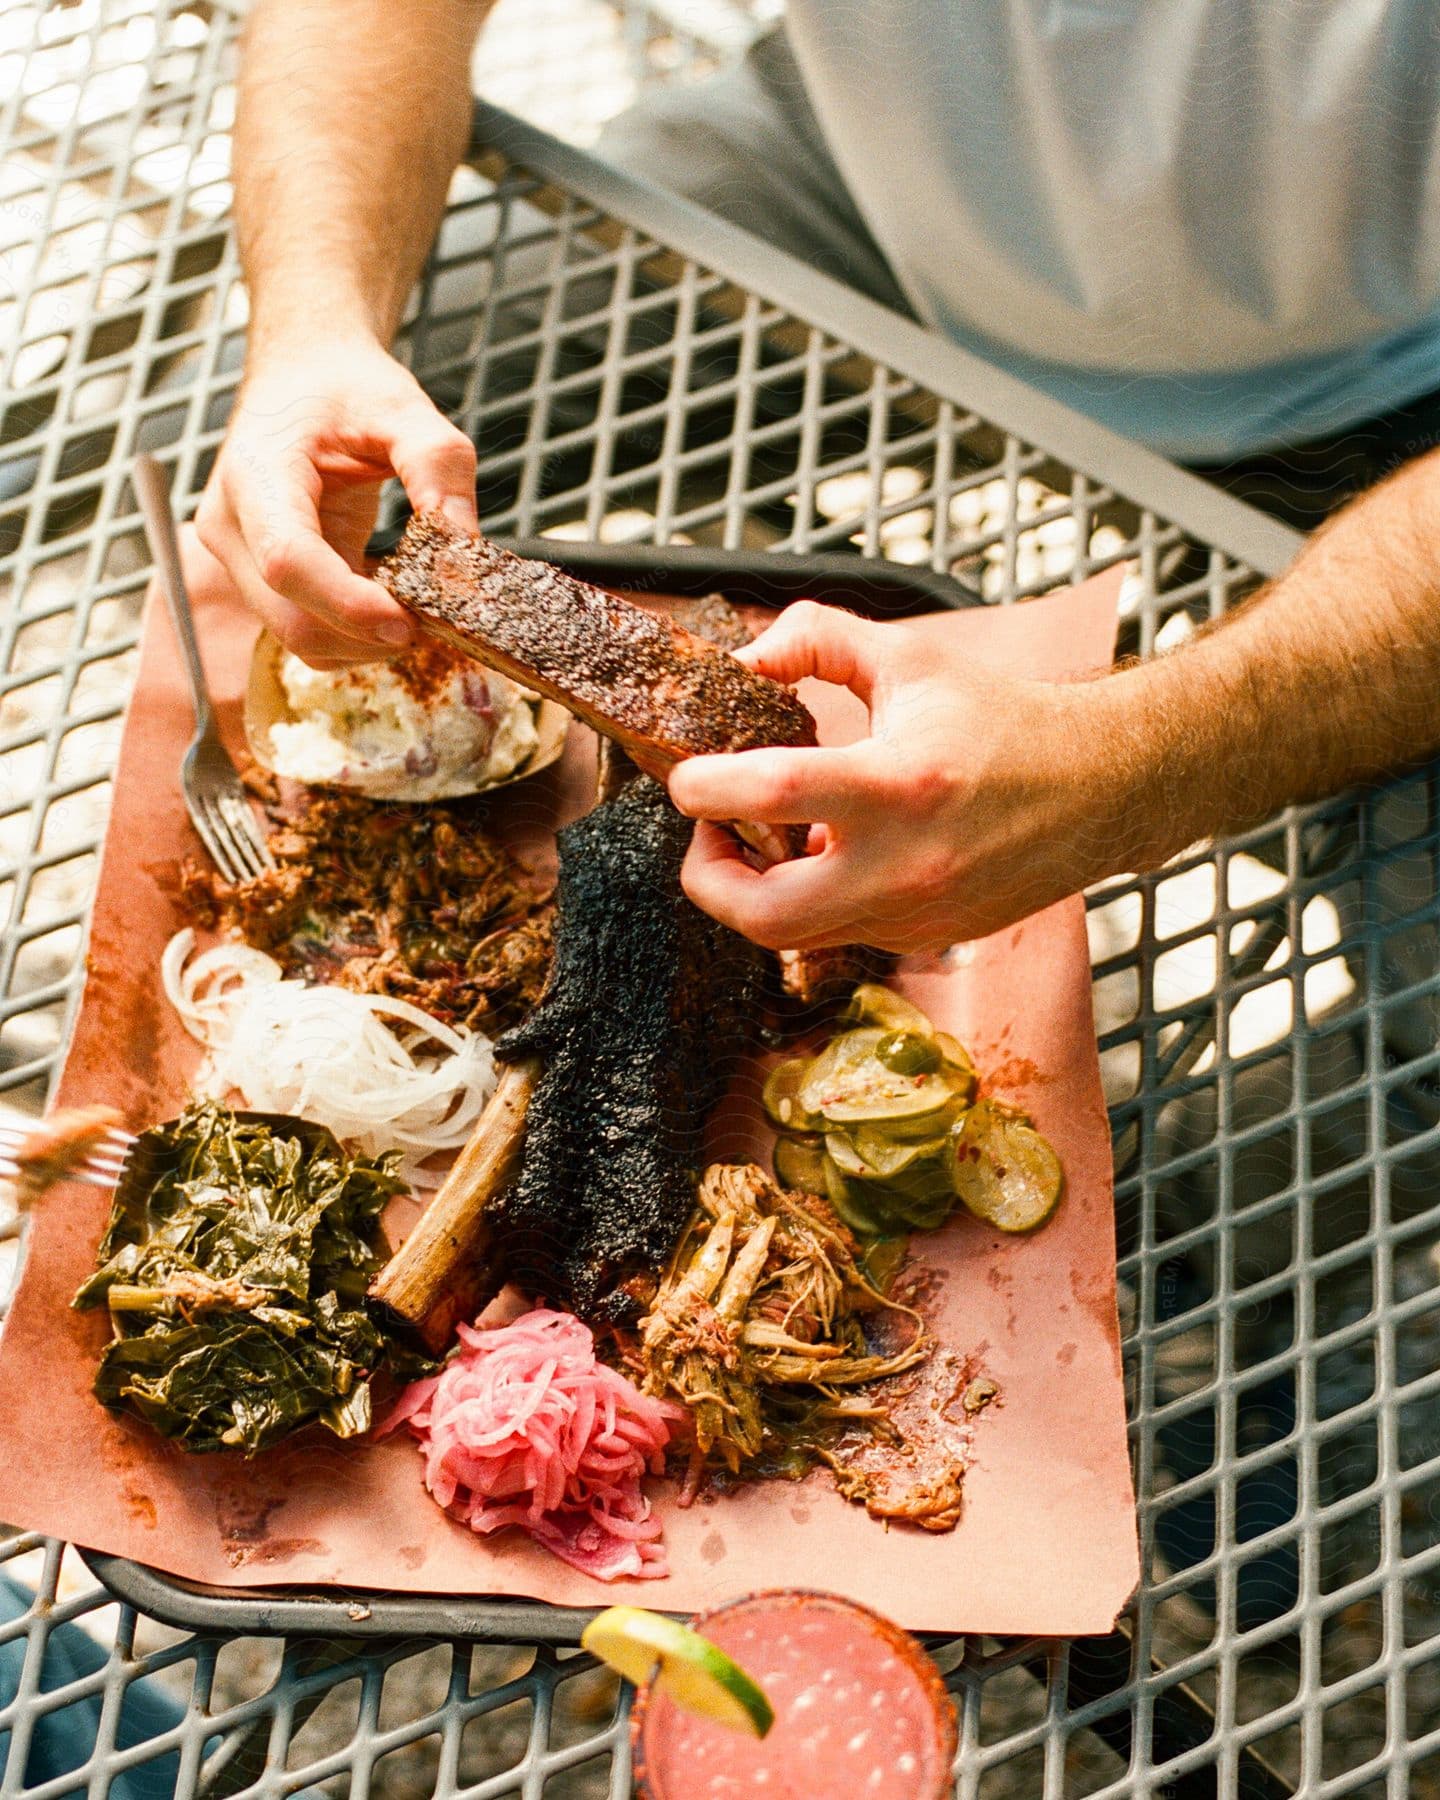 Person holding a barbecued rib over a paper-lined tray of assorted smoked meats and sides on a metal table.